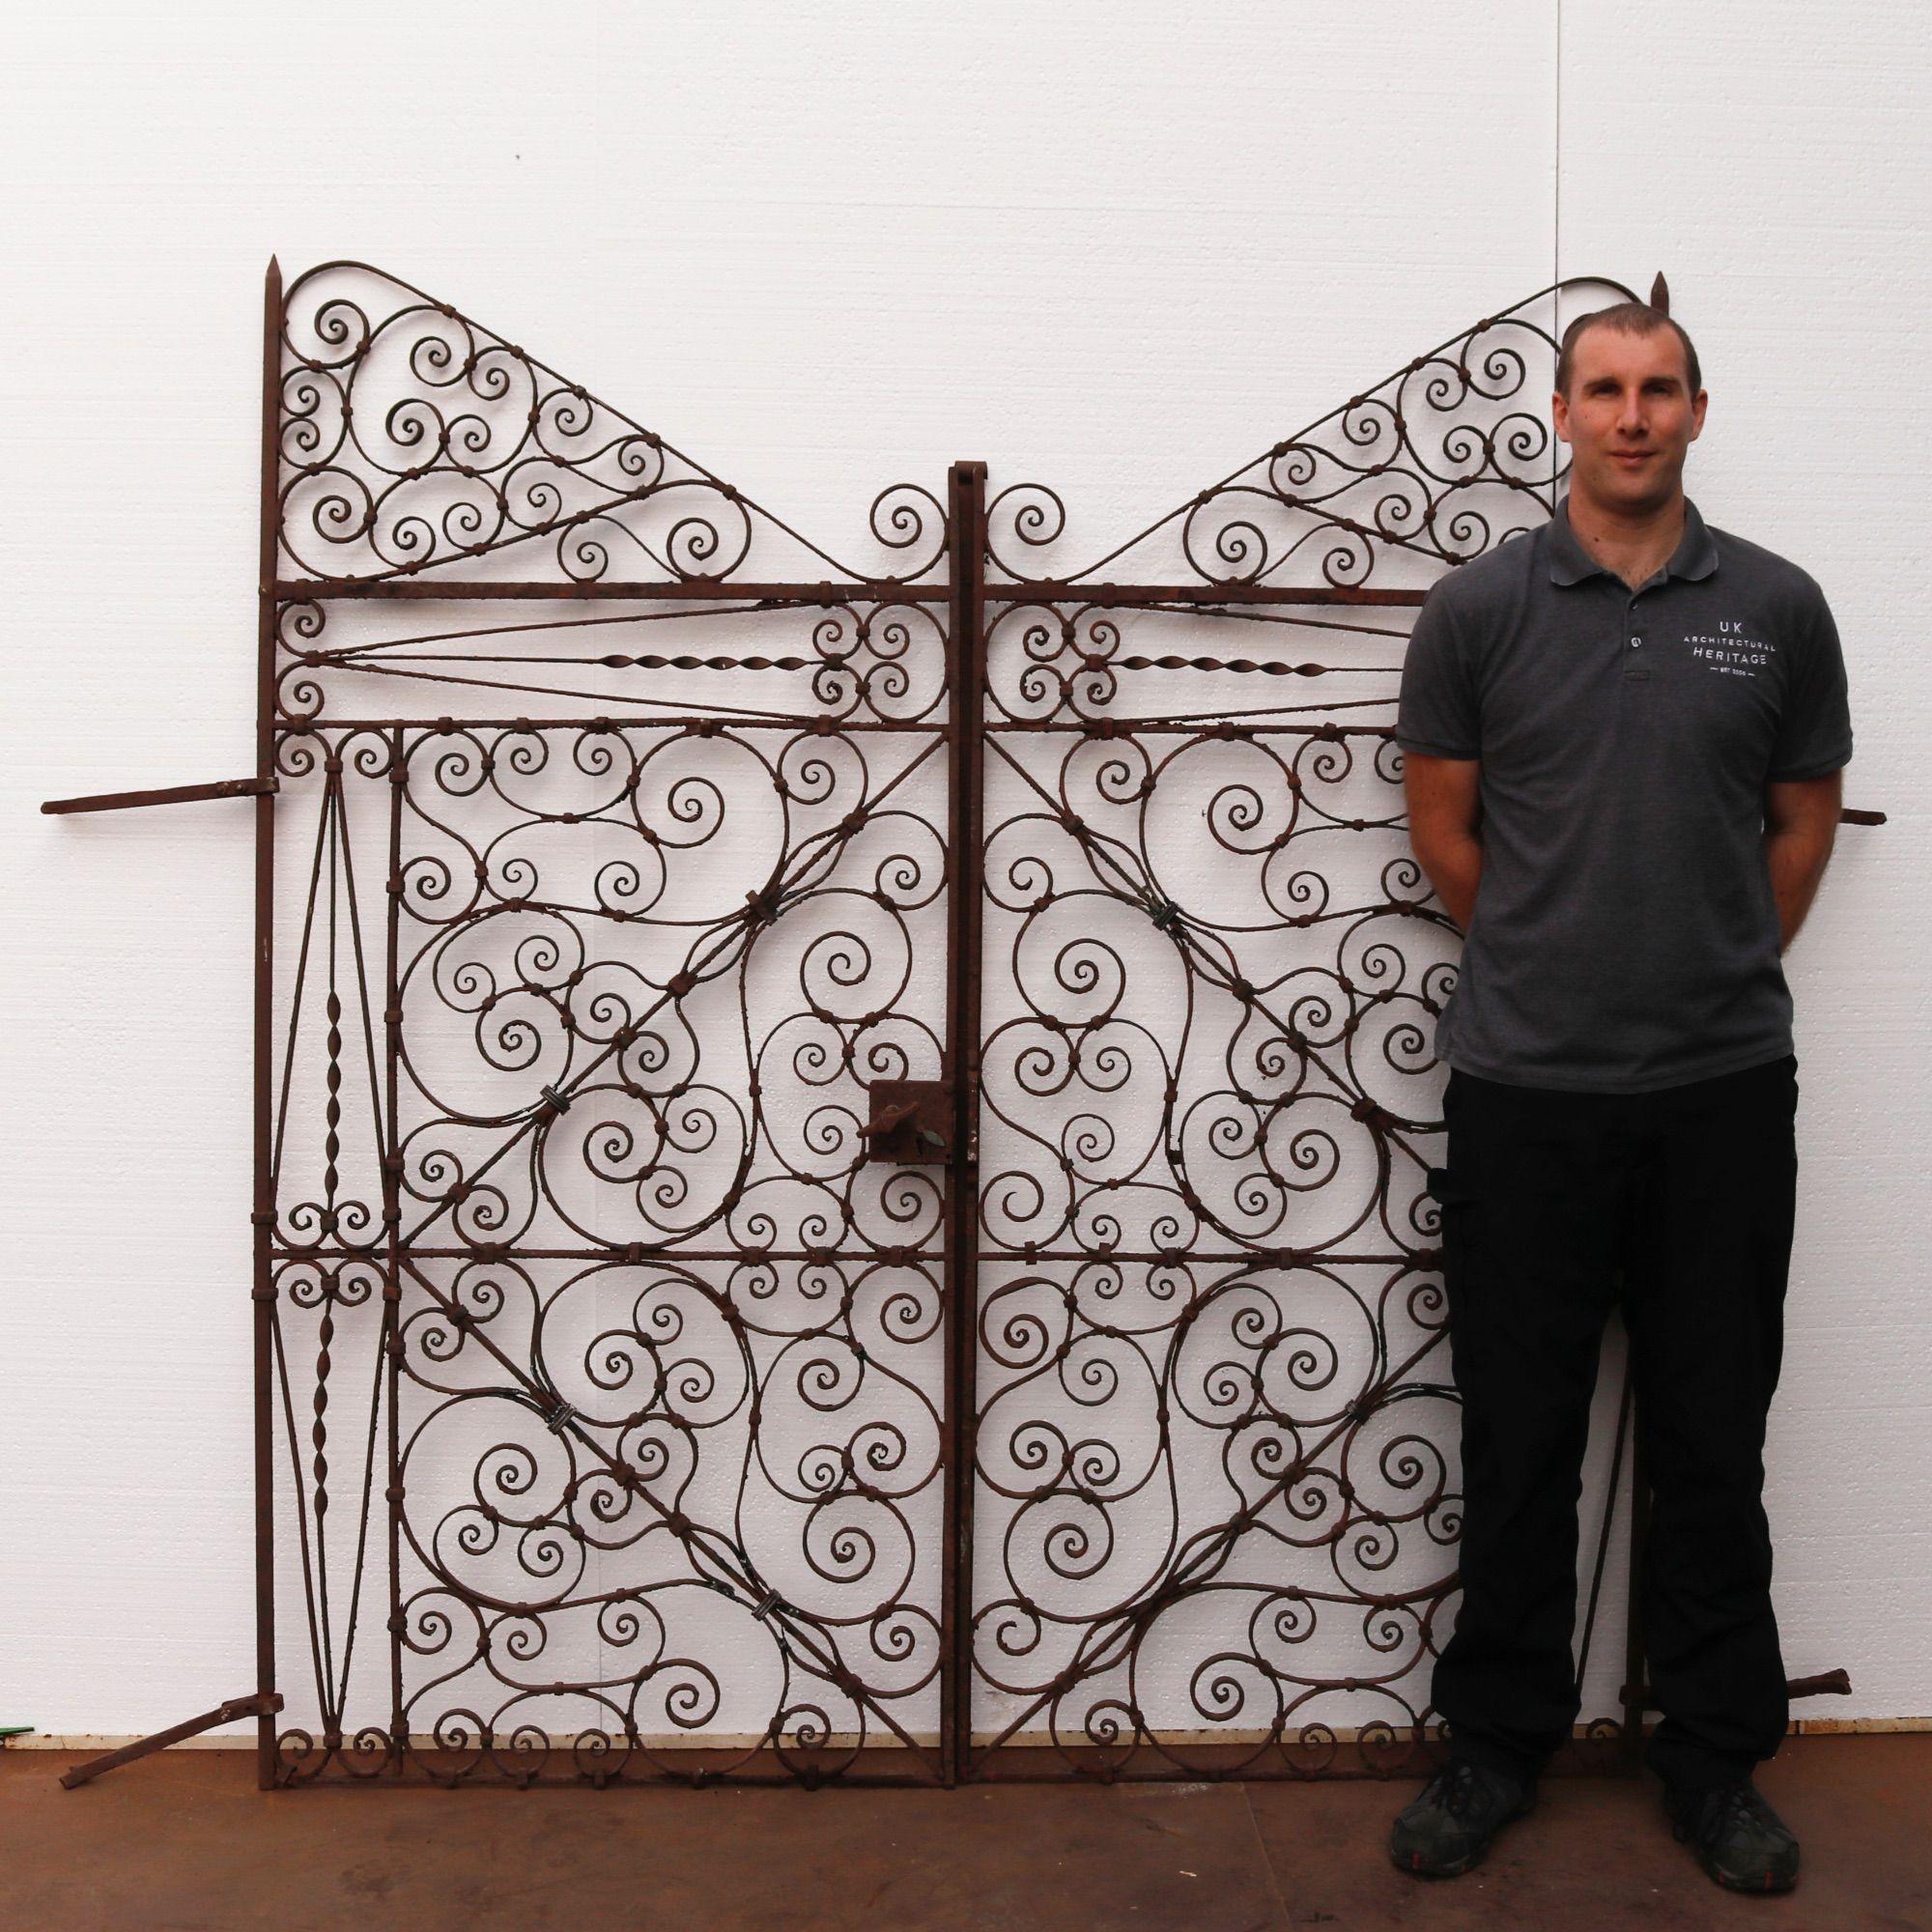 Victorian wrought iron French pedestrian gates. Dating back to 1870, this pair incorporate both Victorian and Regency styles alike, which would fit well in the garden of an English countryside home or period property. The abundance of scrolls morph